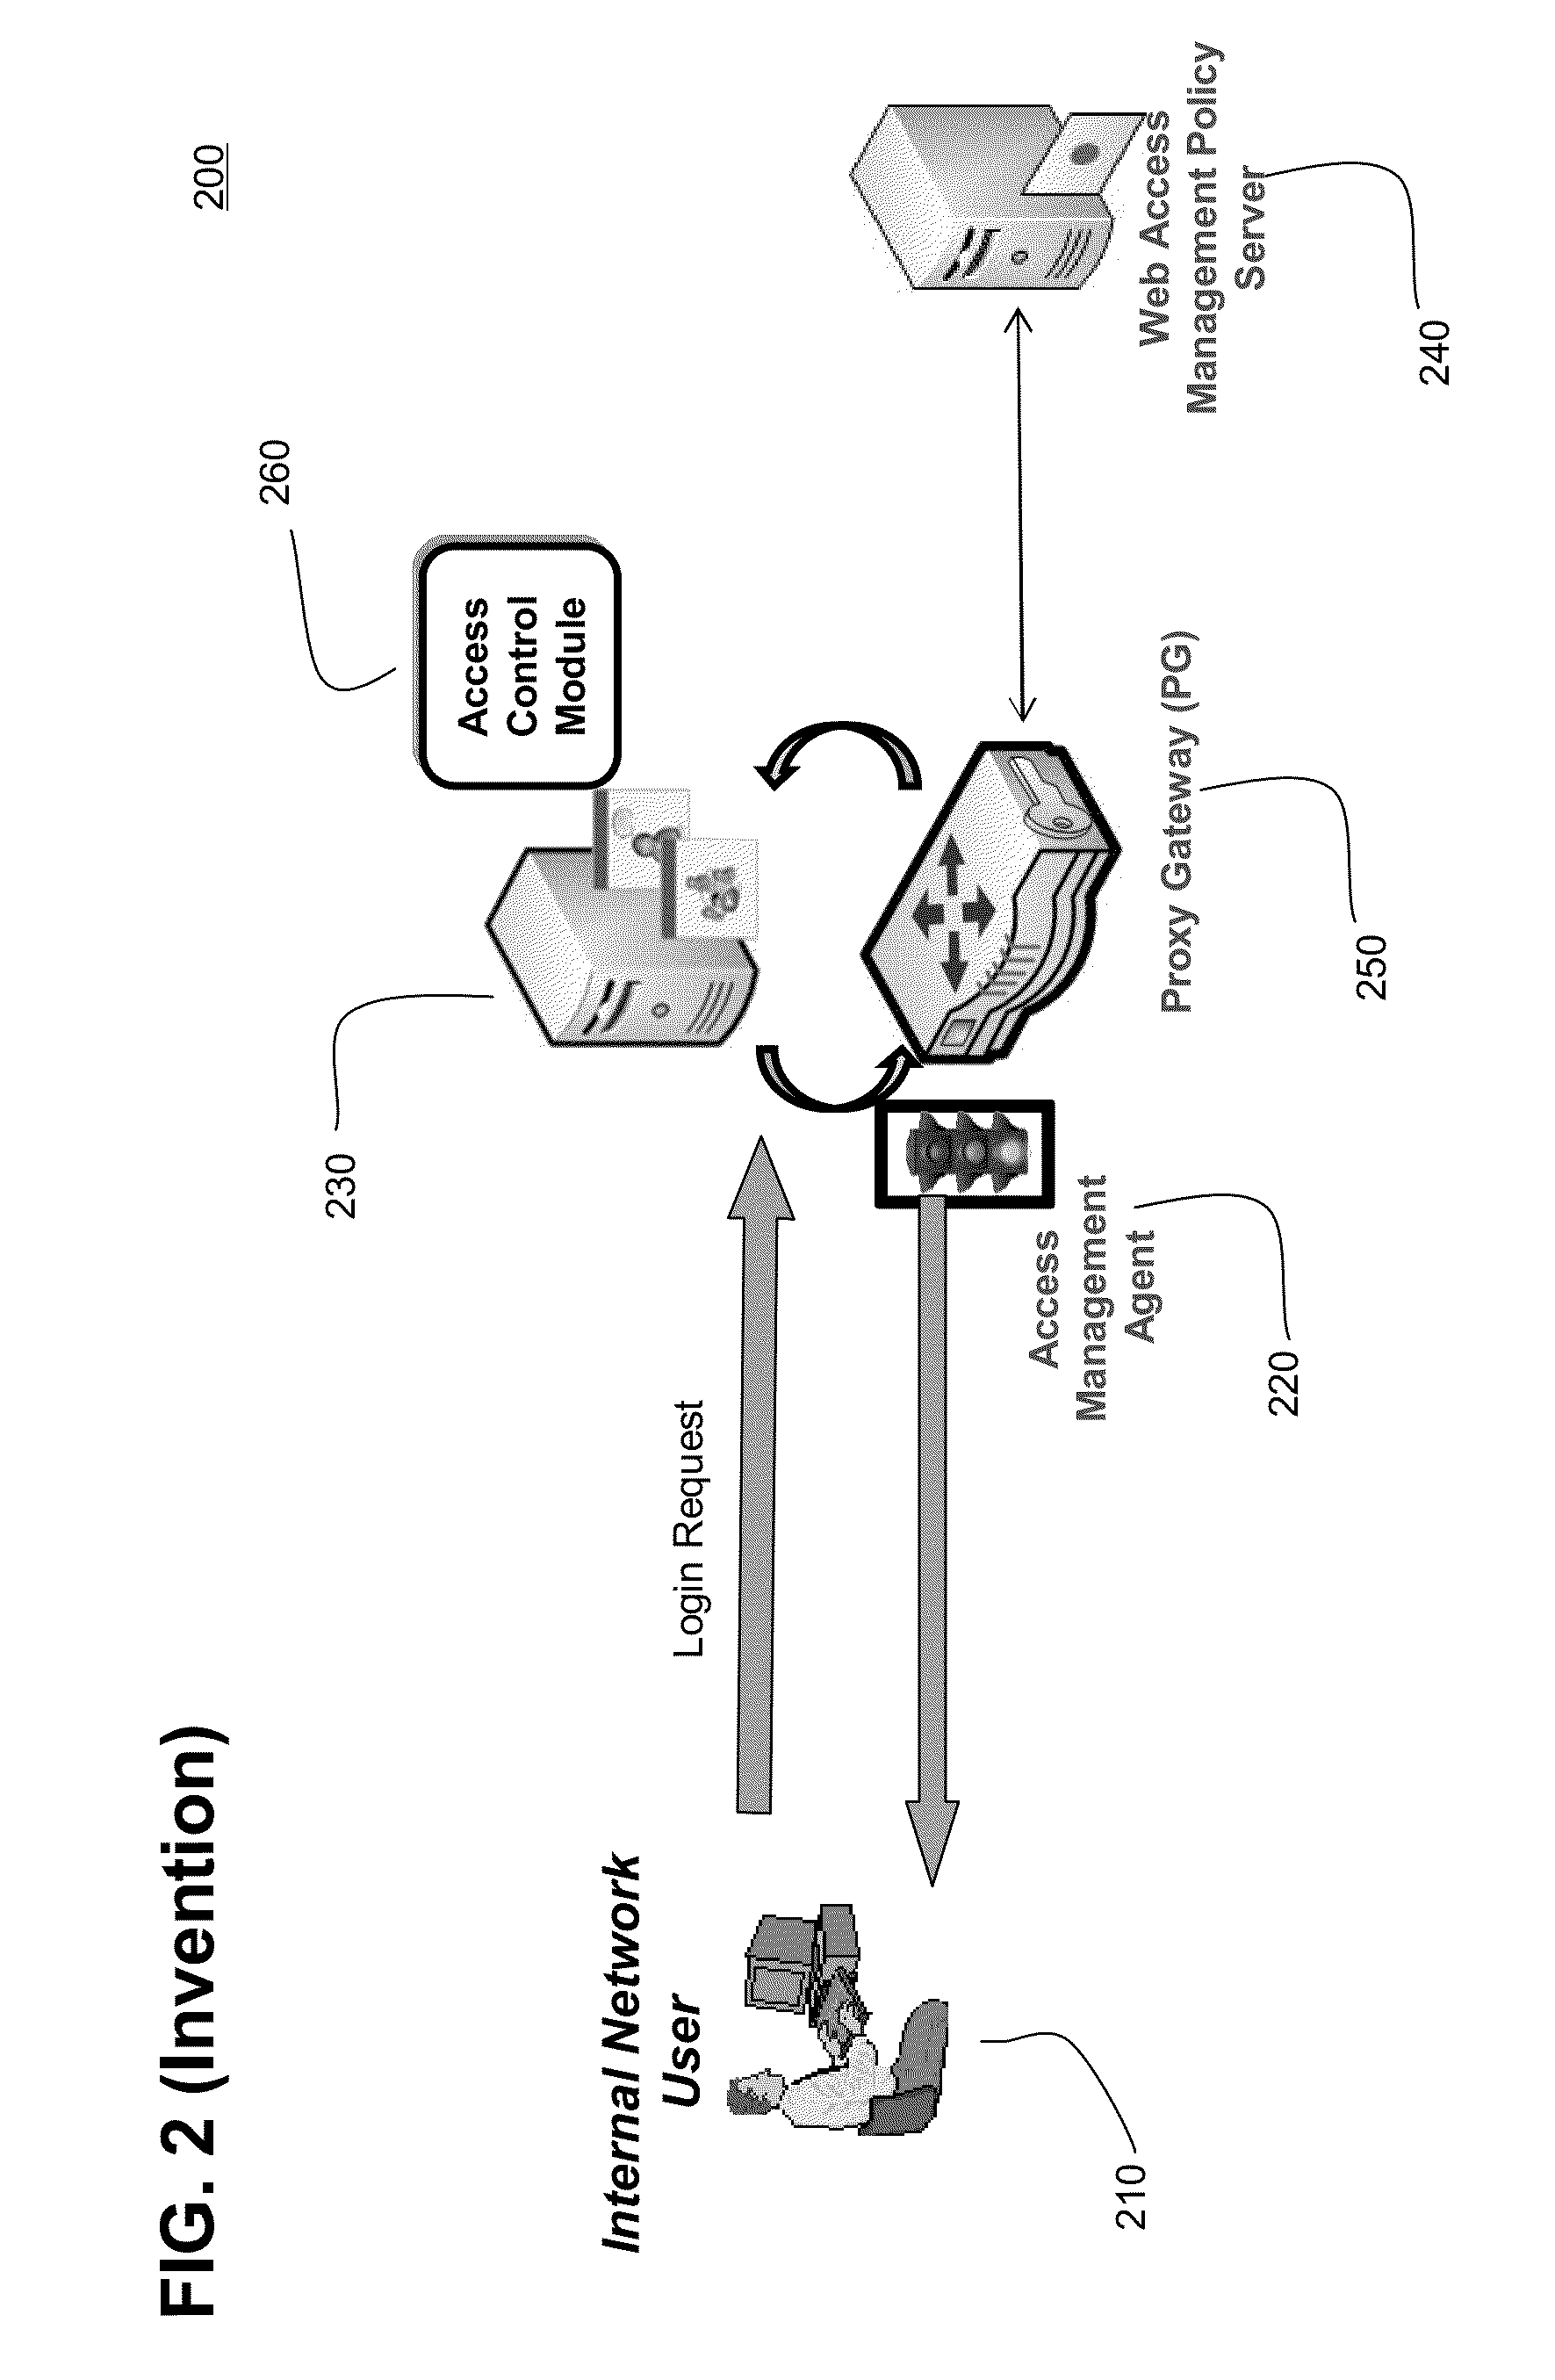 System and method for providing access to a software application